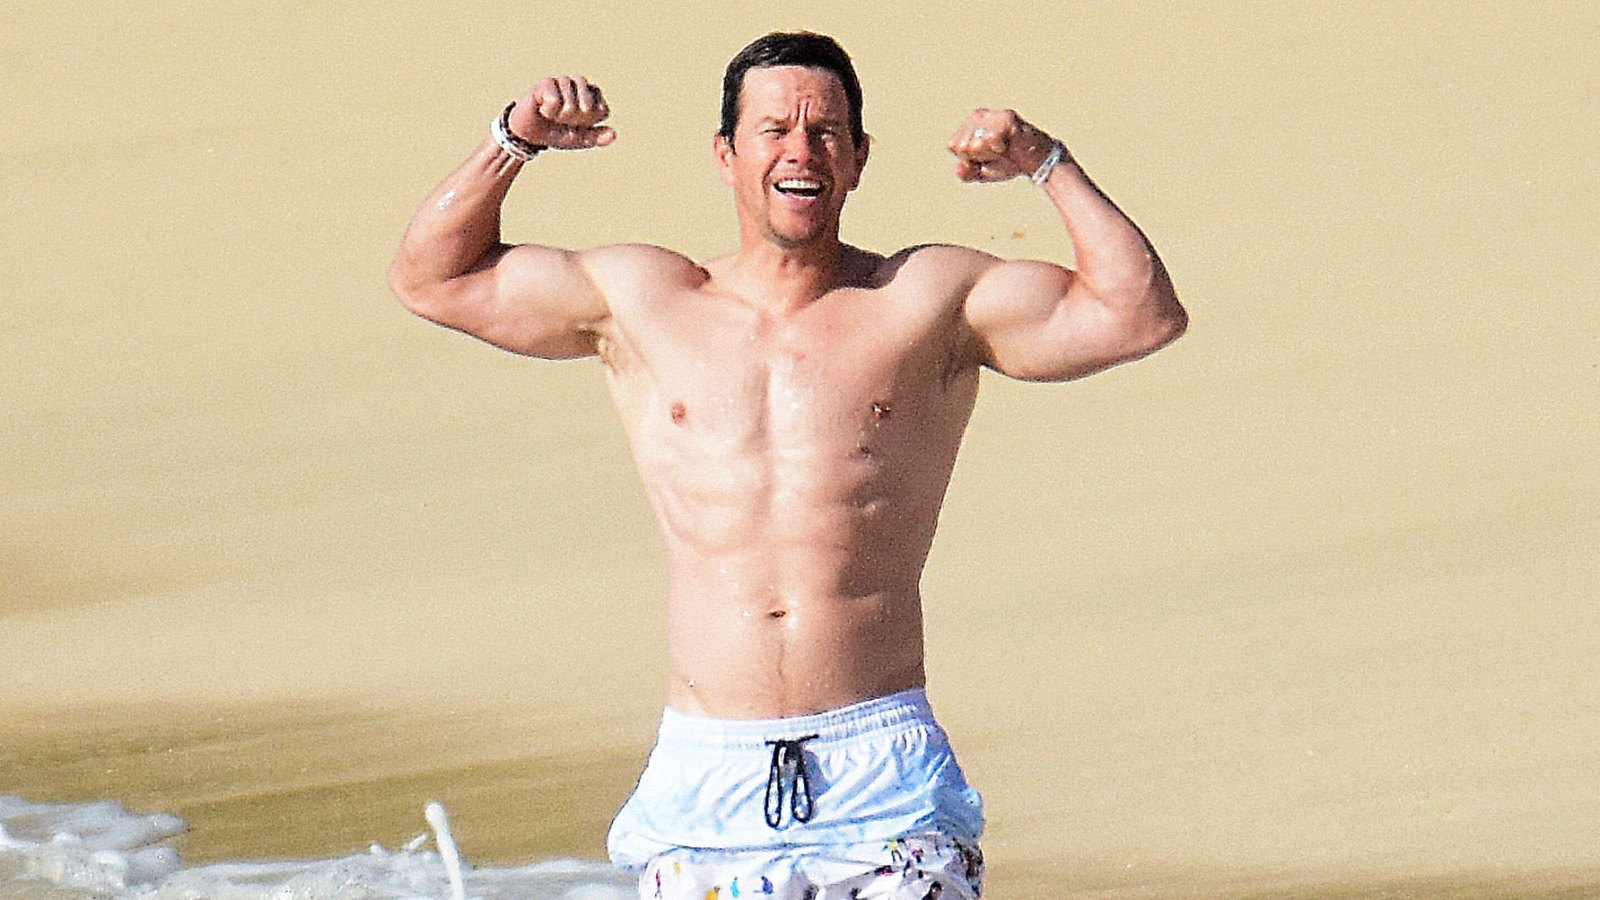 Mark Wahlberg Flexes His Muscles While on Vacation With His Family